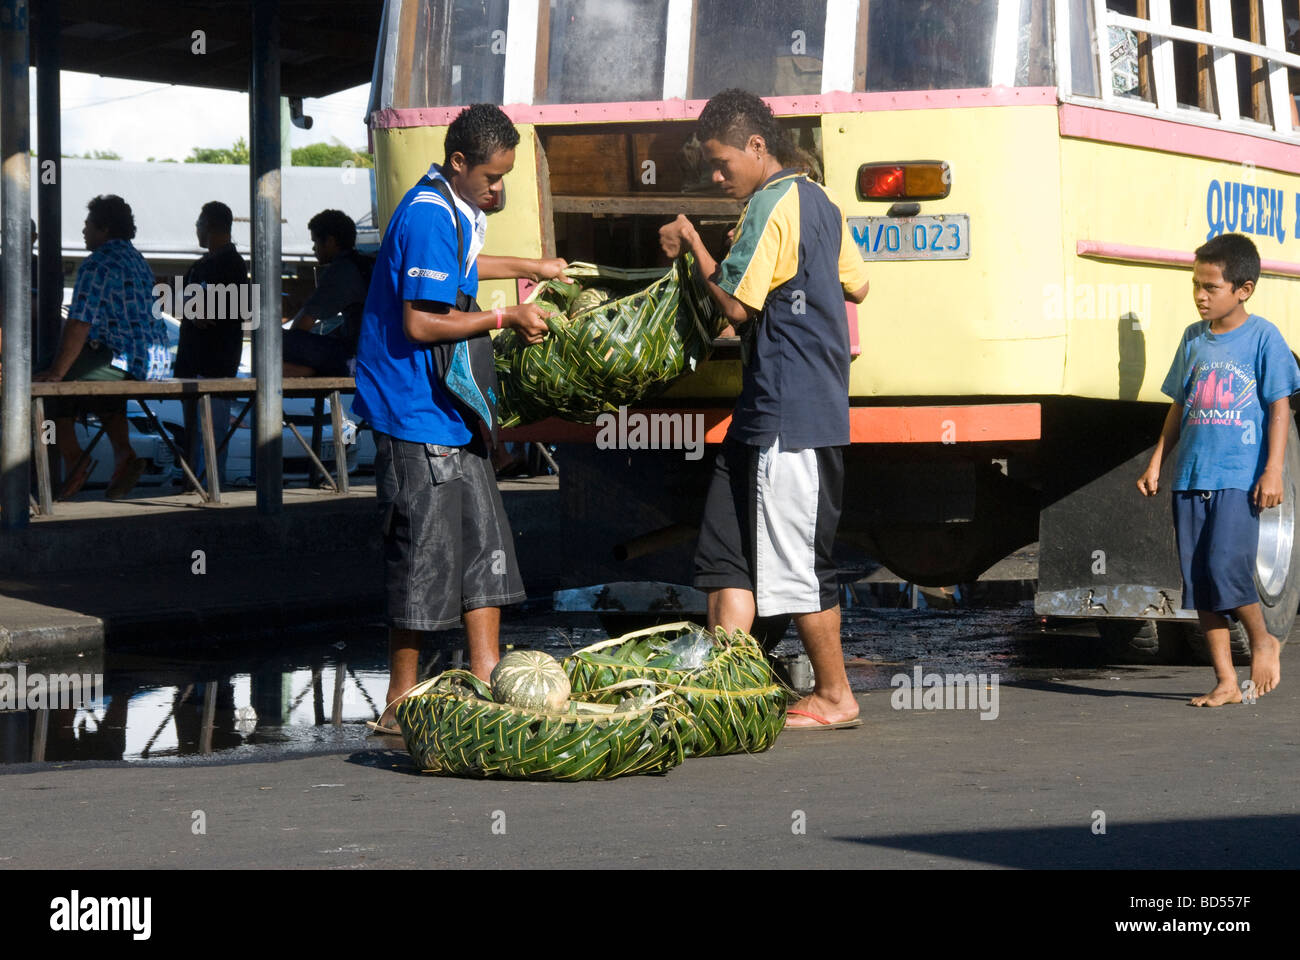 Unloading market produce from brightly coloured bus in Apia, Western Samoa Stock Photo